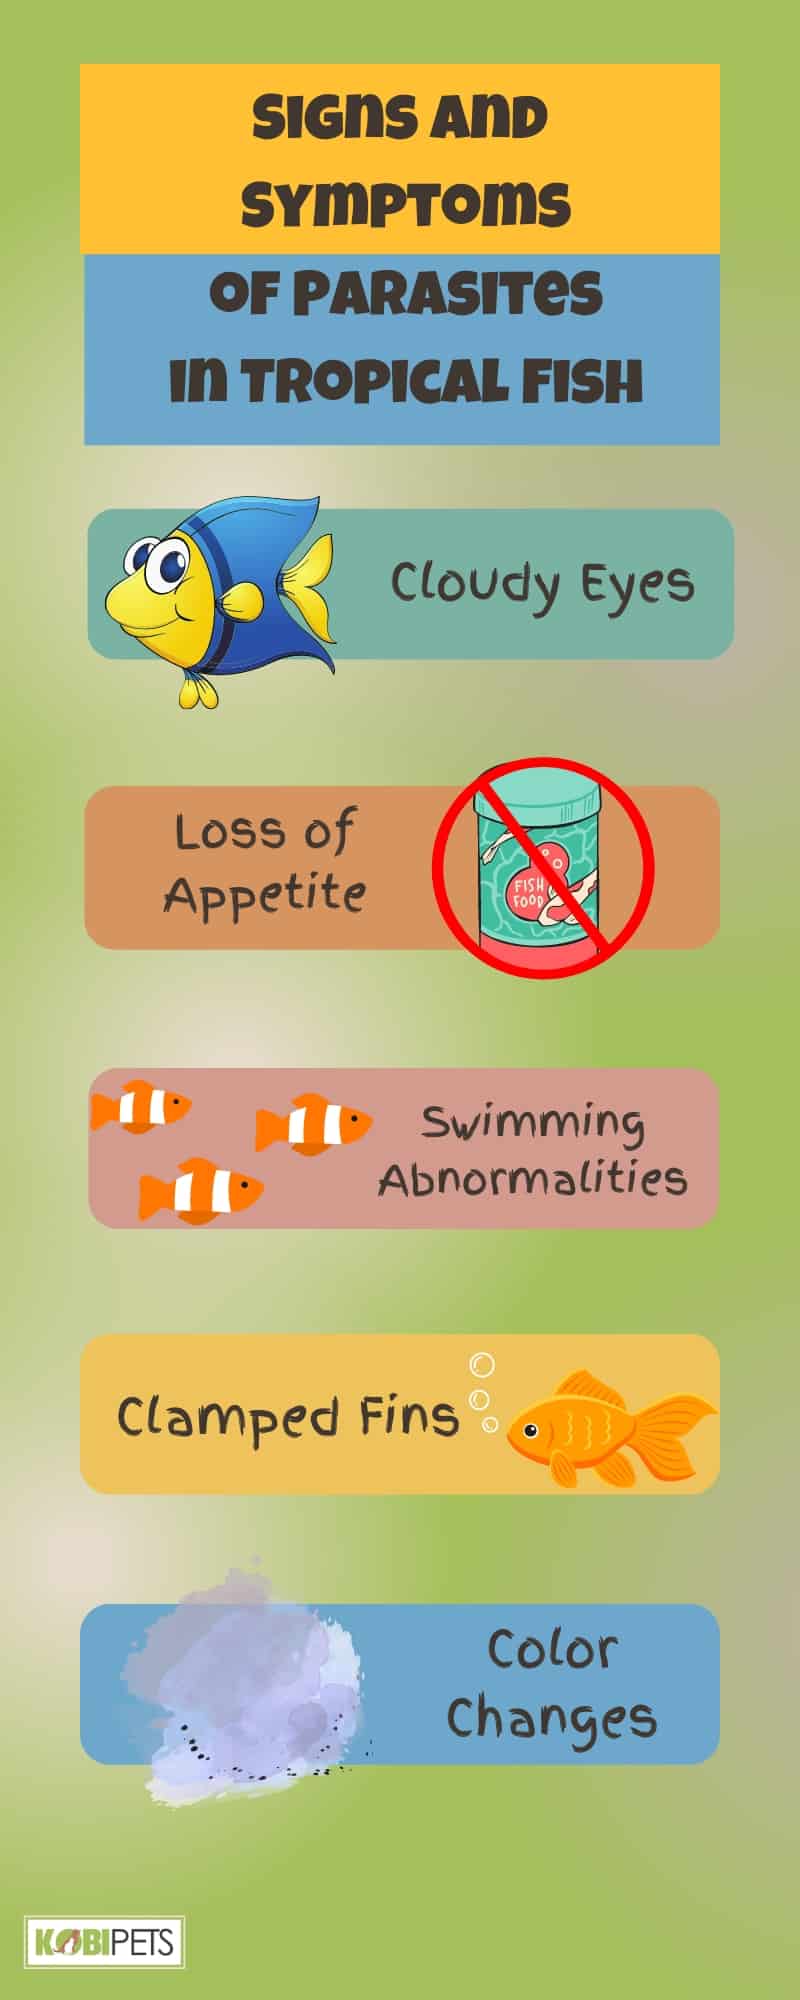 Signs and Symptoms of Parasites in Tropical Fish Infographic